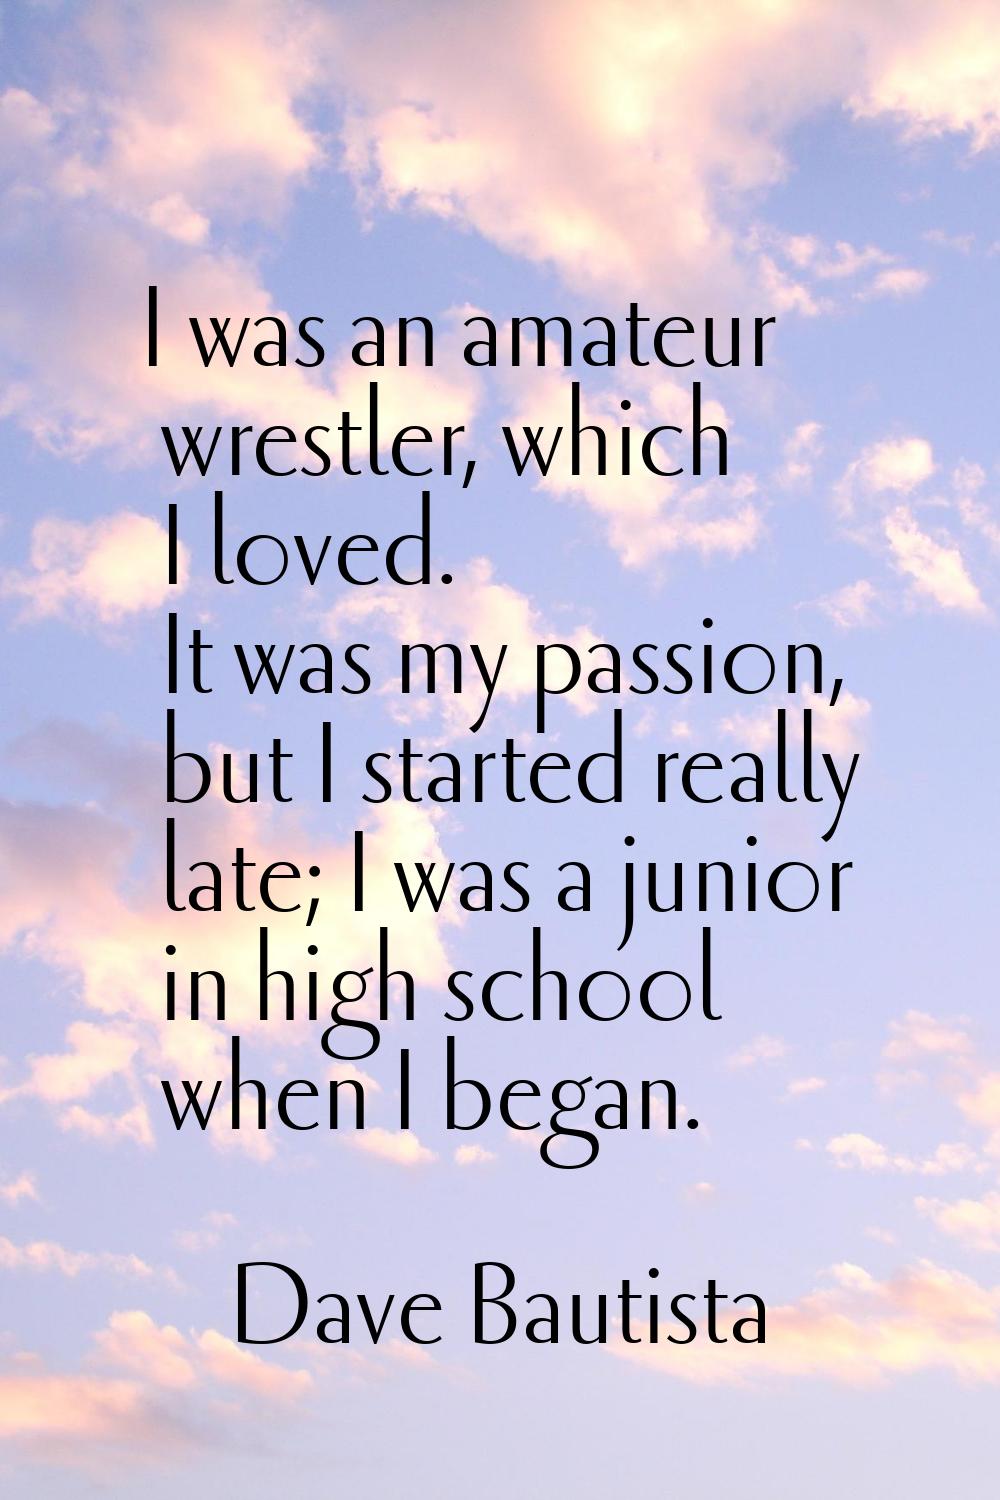 I was an amateur wrestler, which I loved. It was my passion, but I started really late; I was a jun